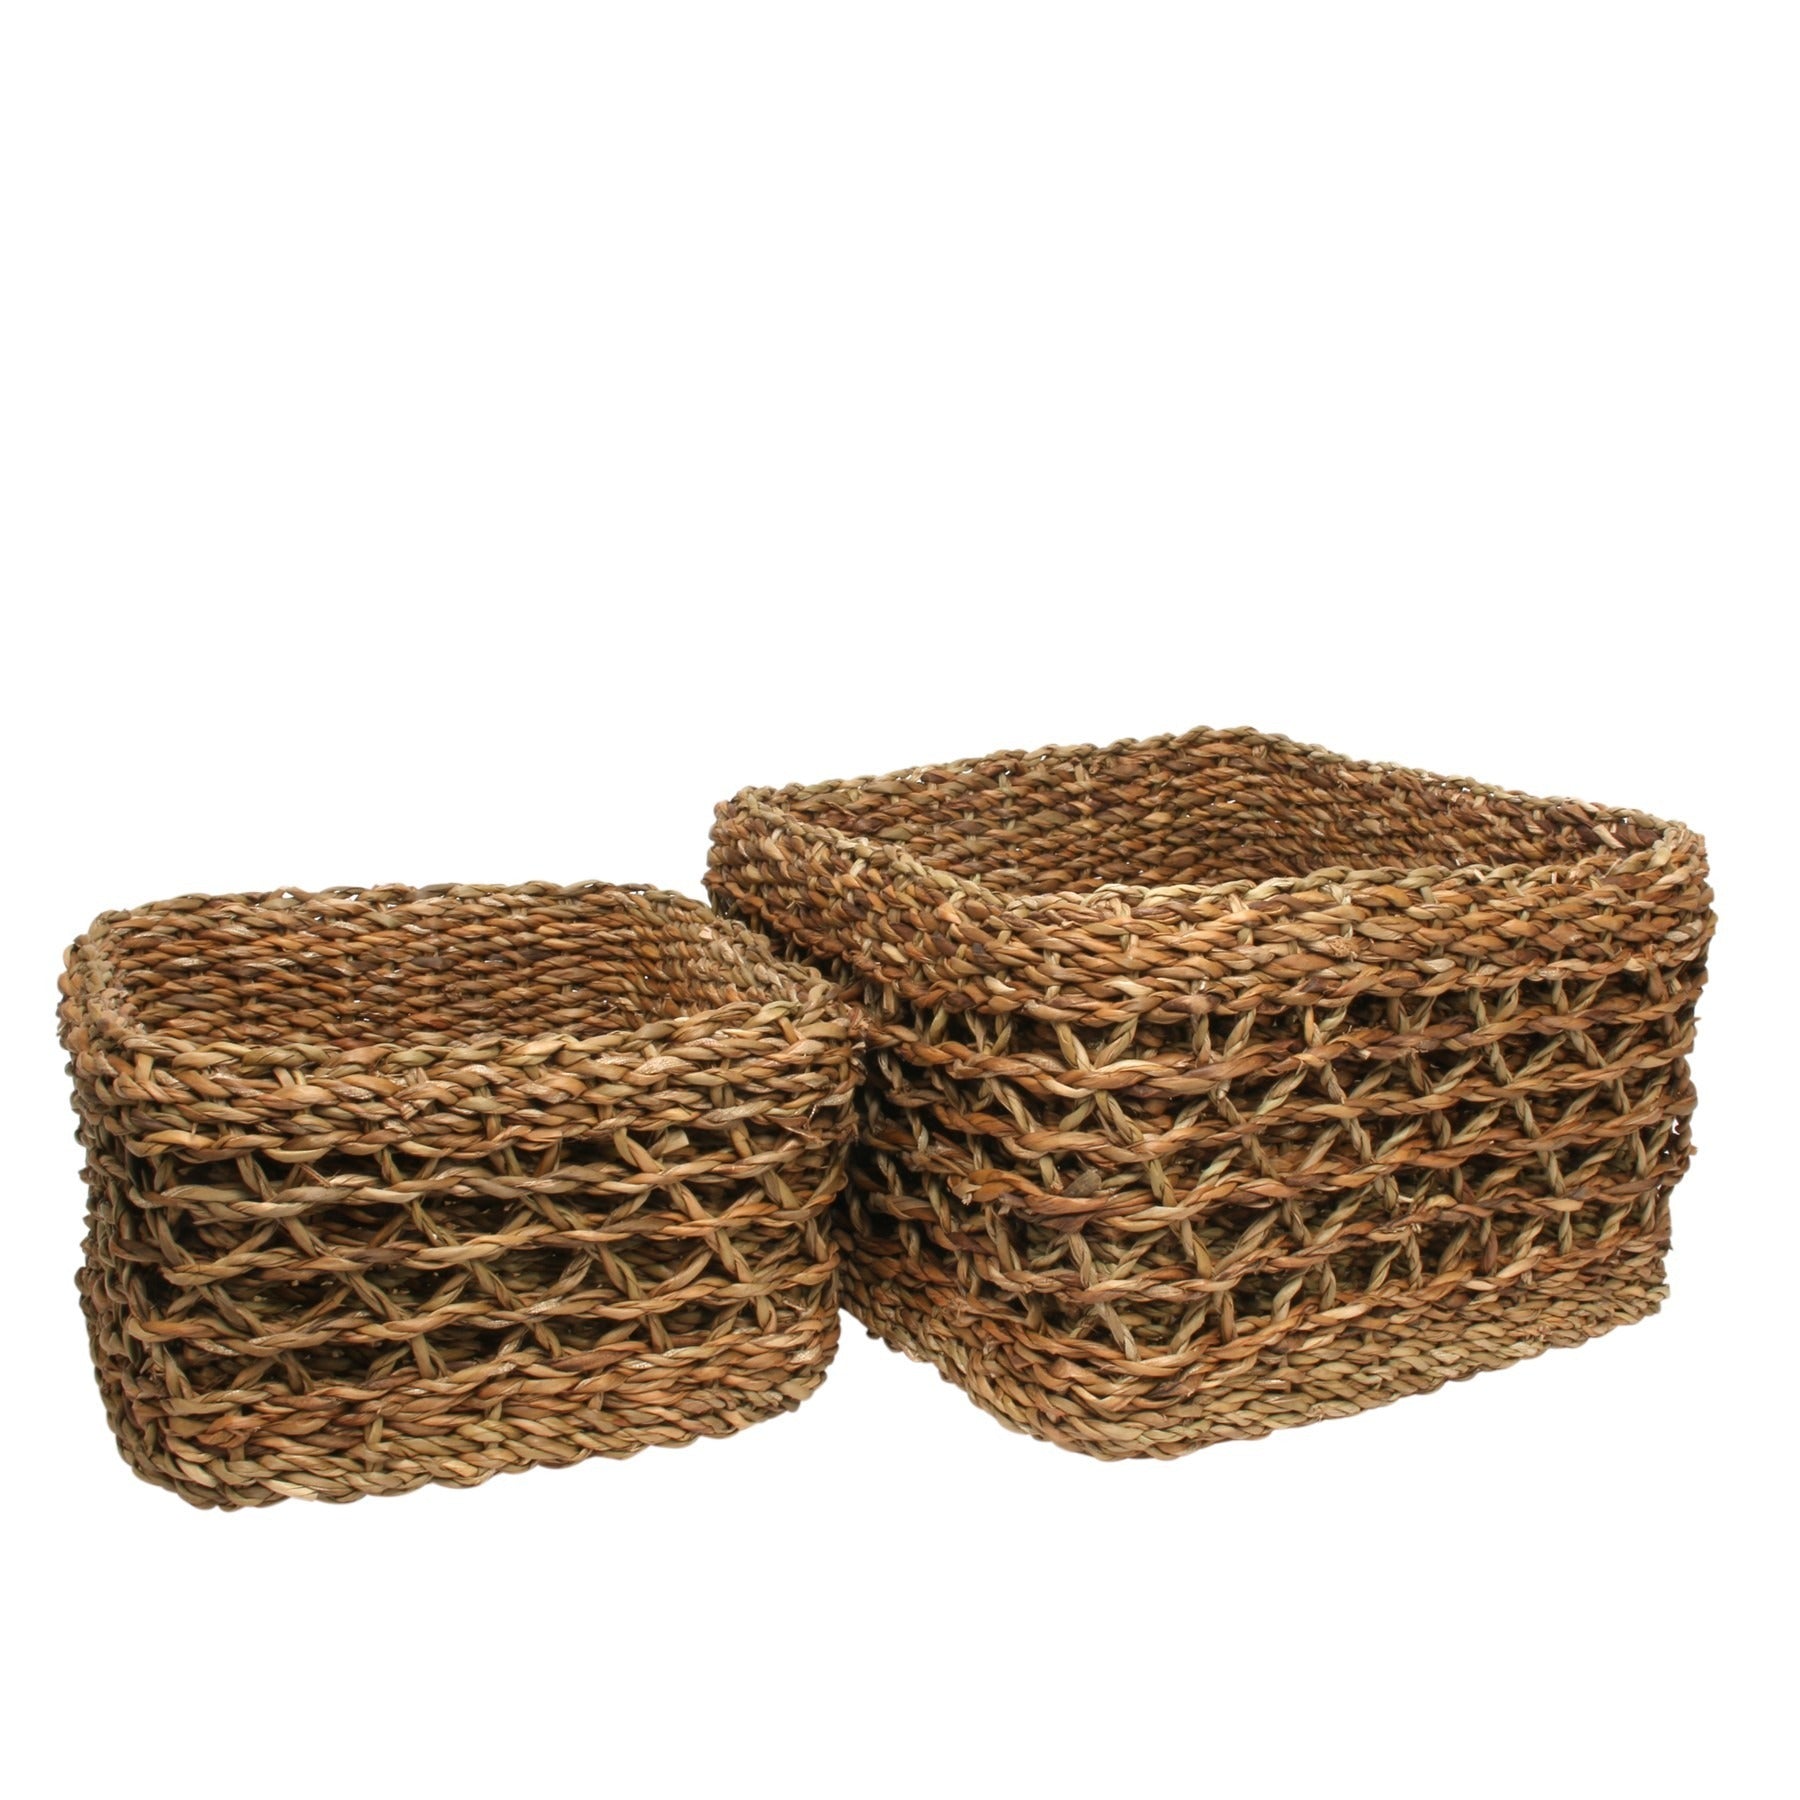 View Set of 2 Square Natural Seagrass Baskets with Liner information